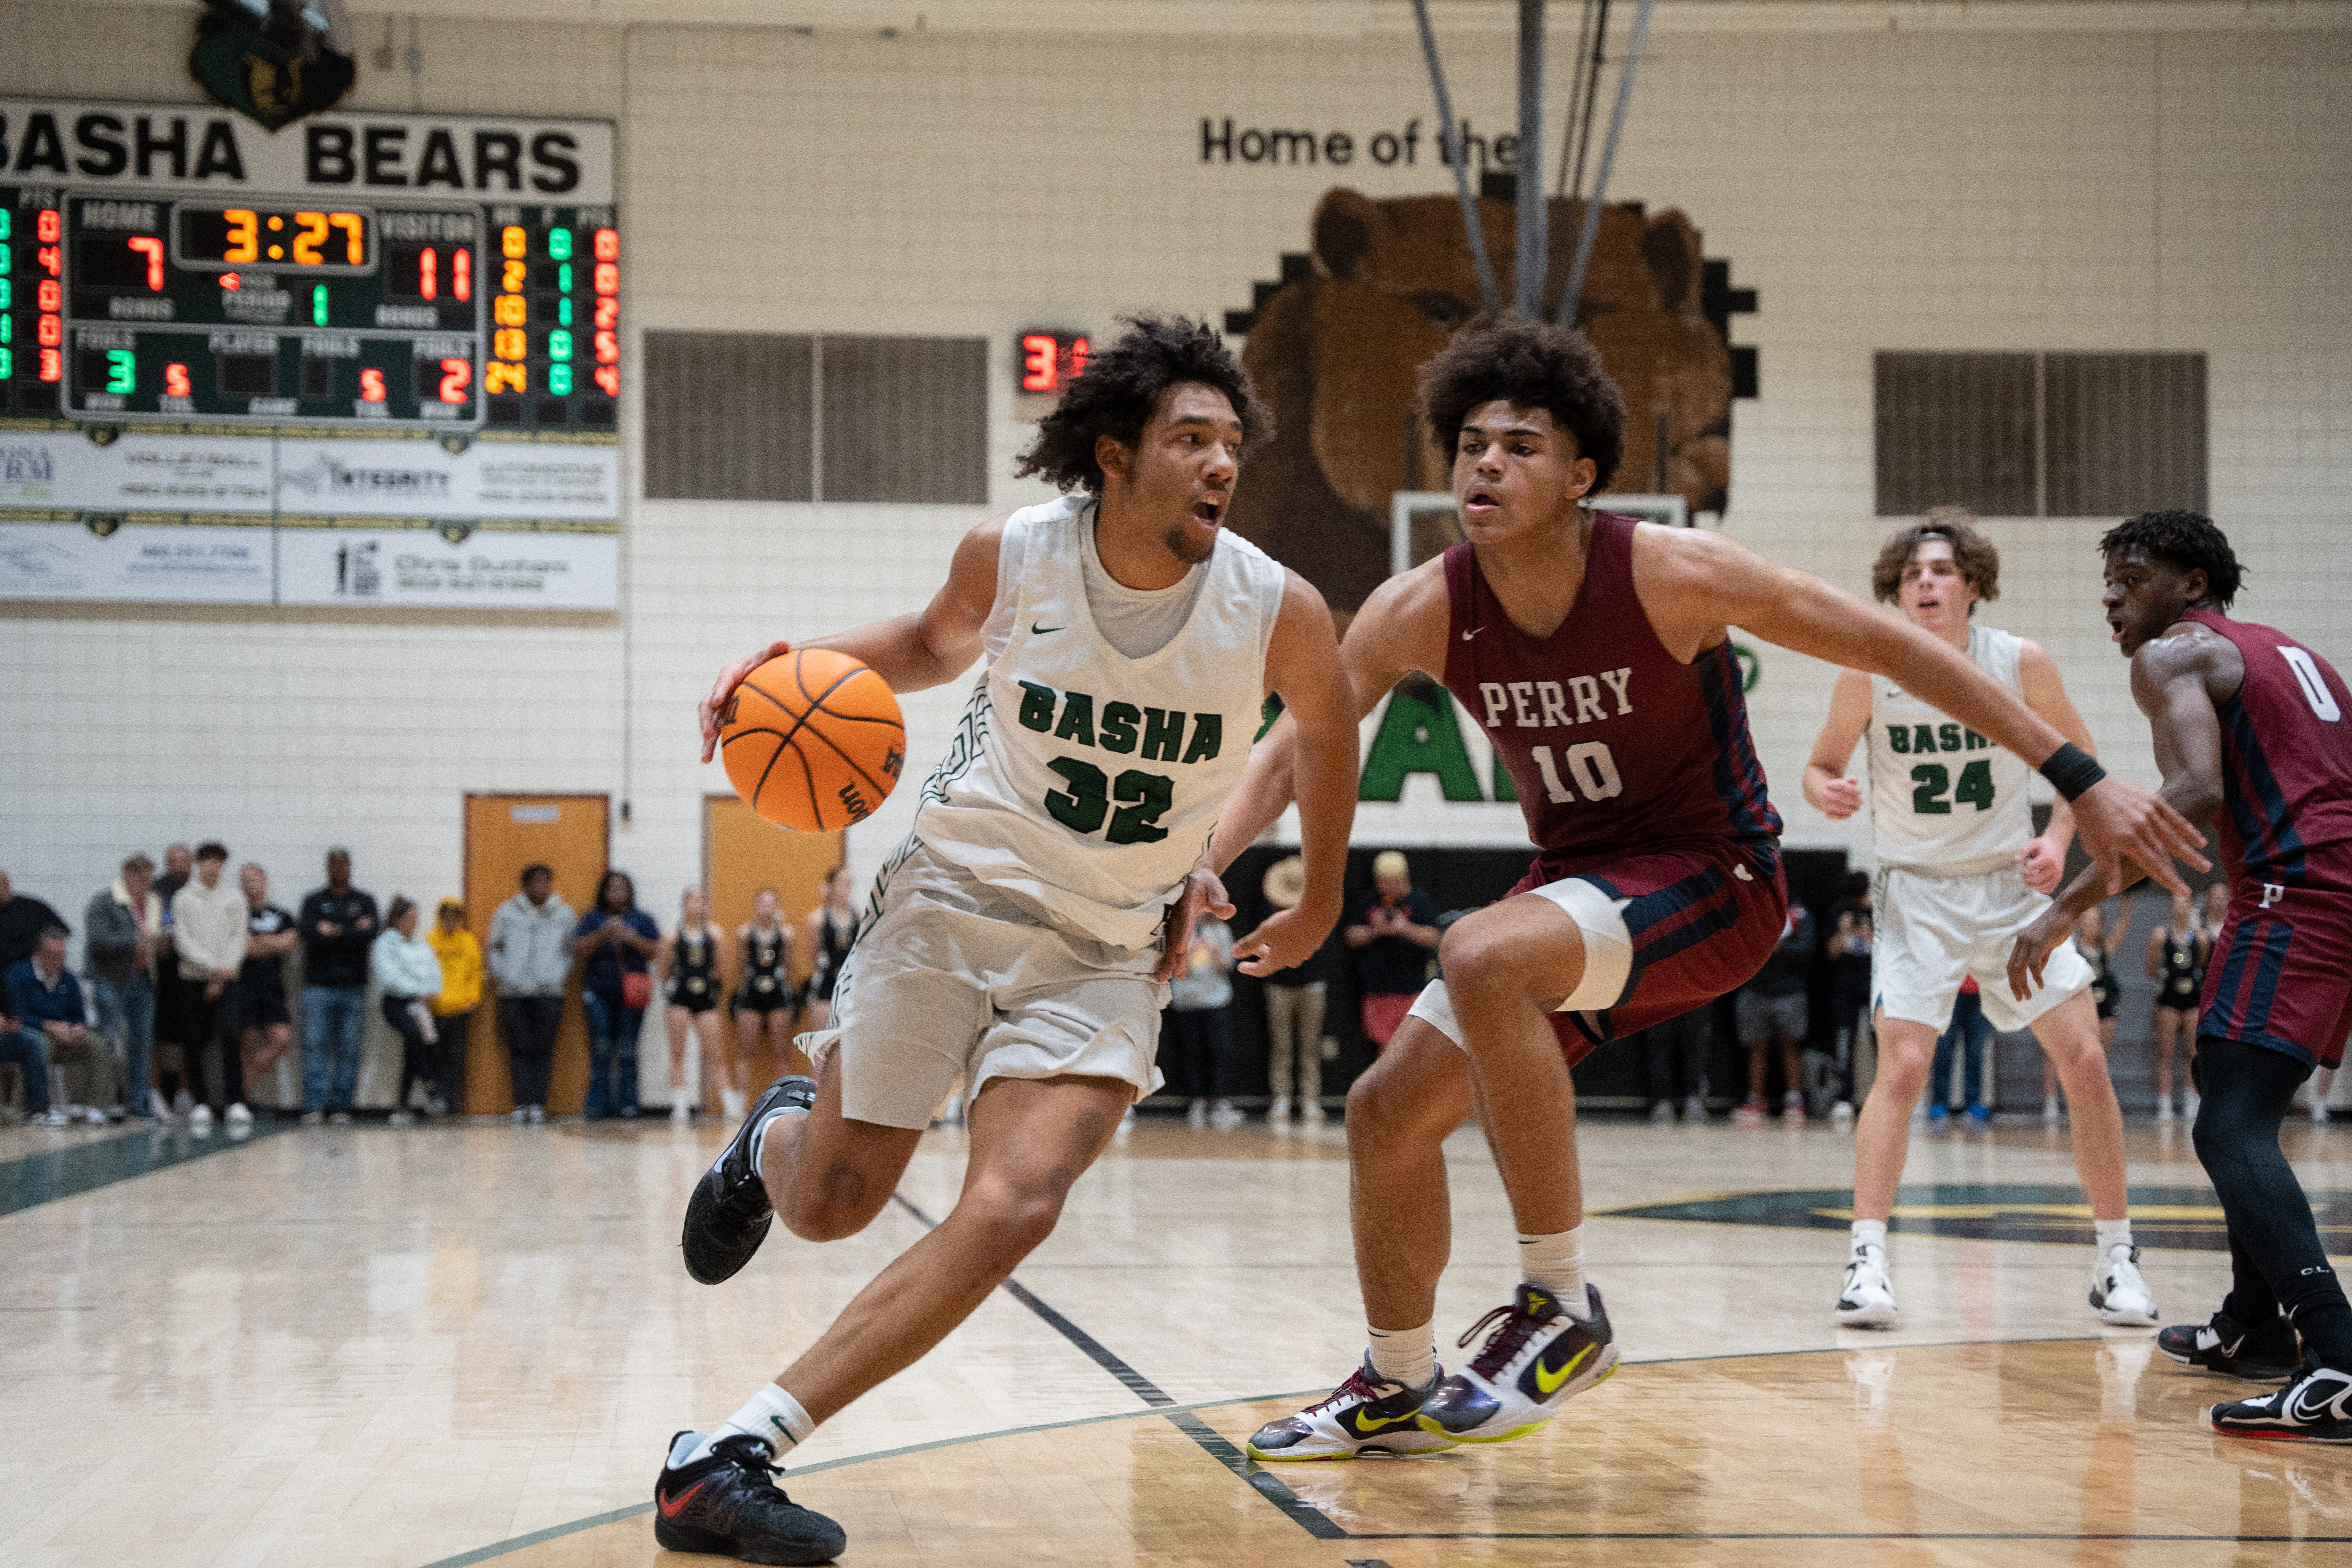 Here are the 10 best boys Arizona high school basketball rivalries for 2022-23